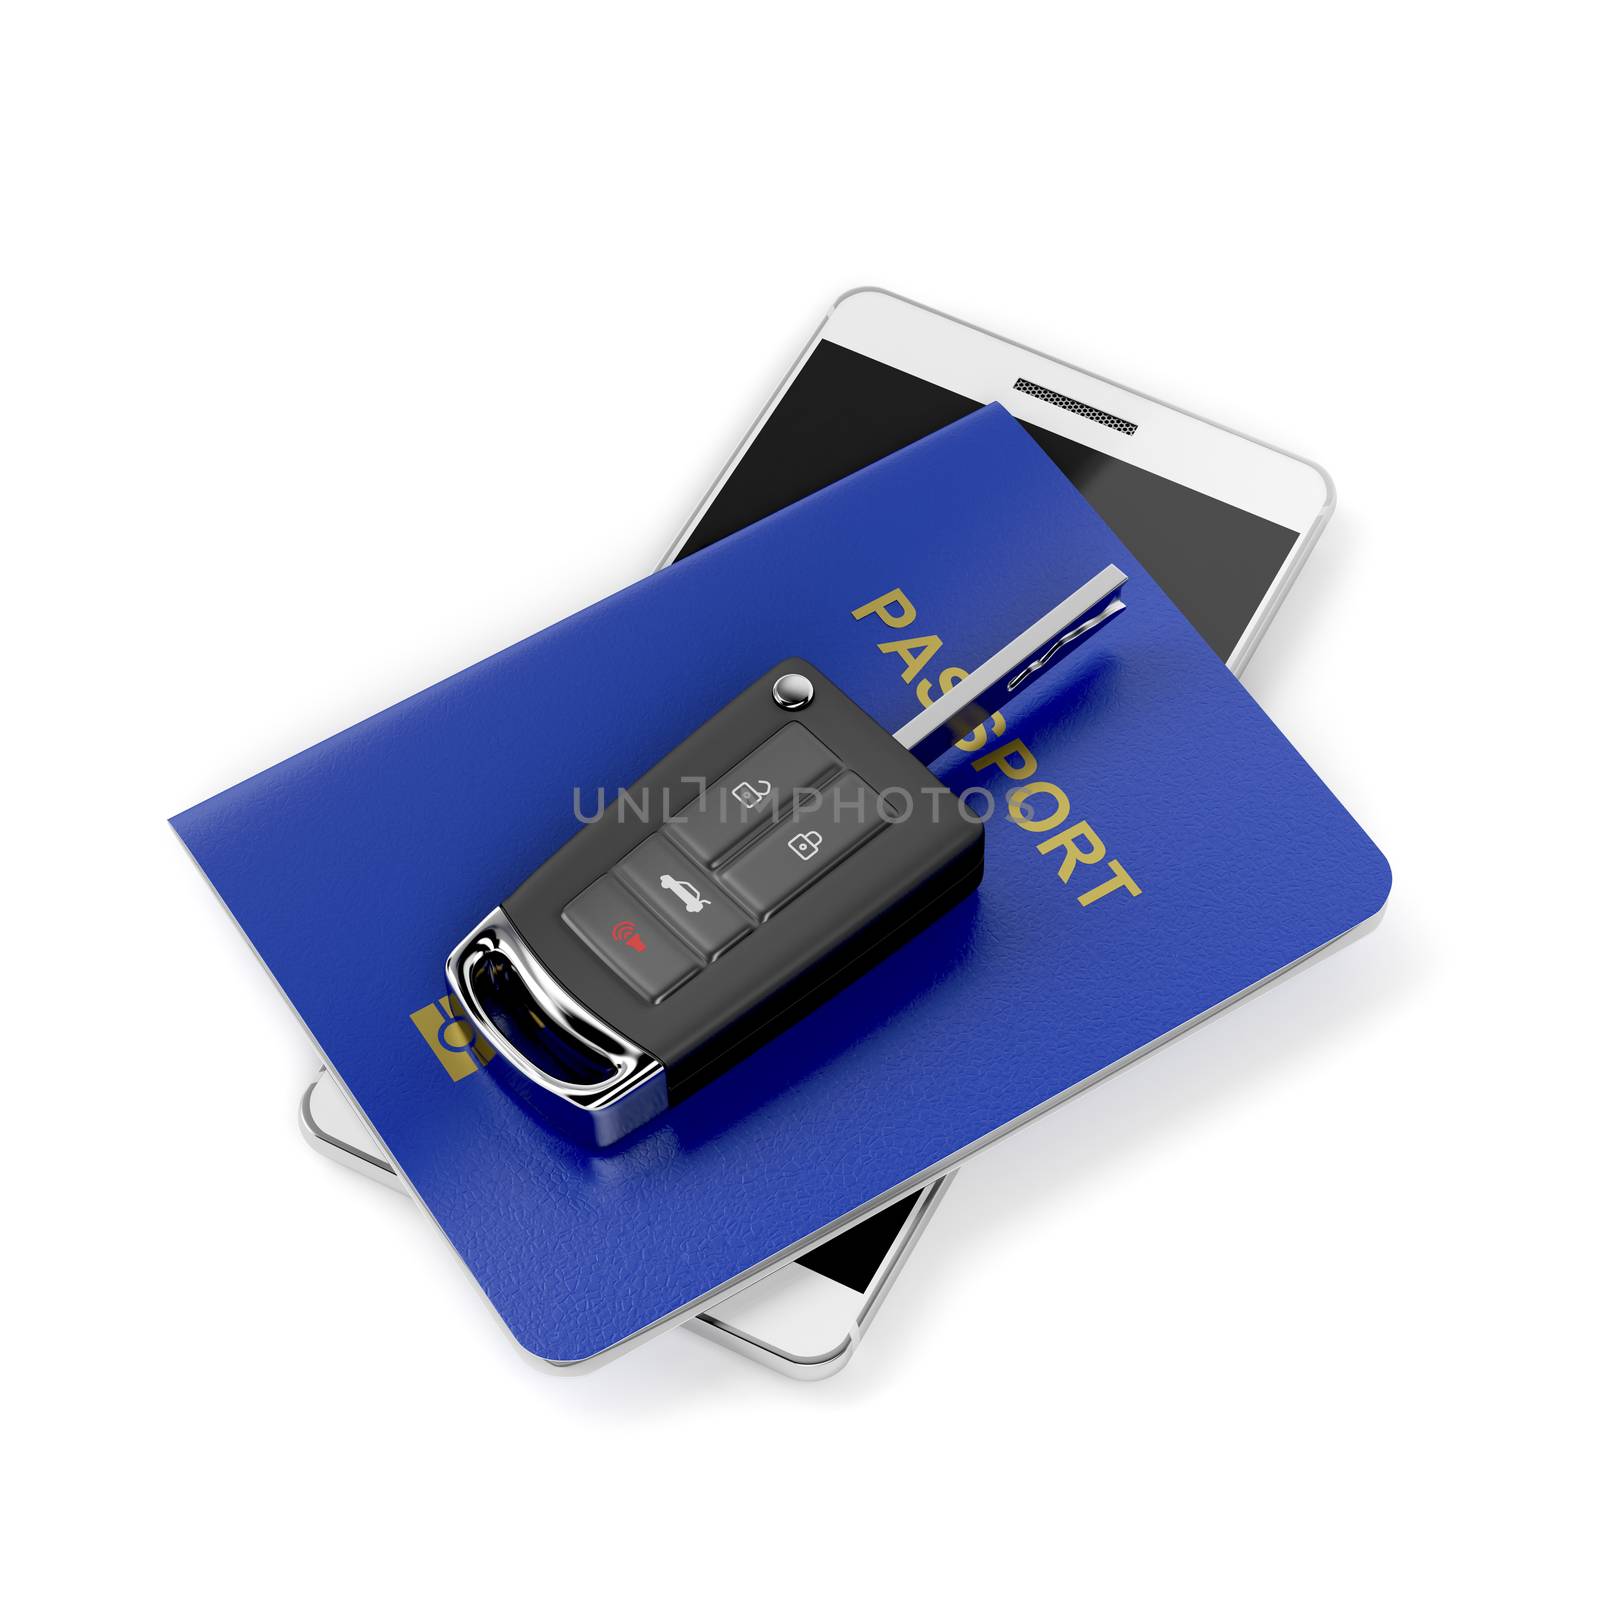 Car key, passport and smartphone on white background